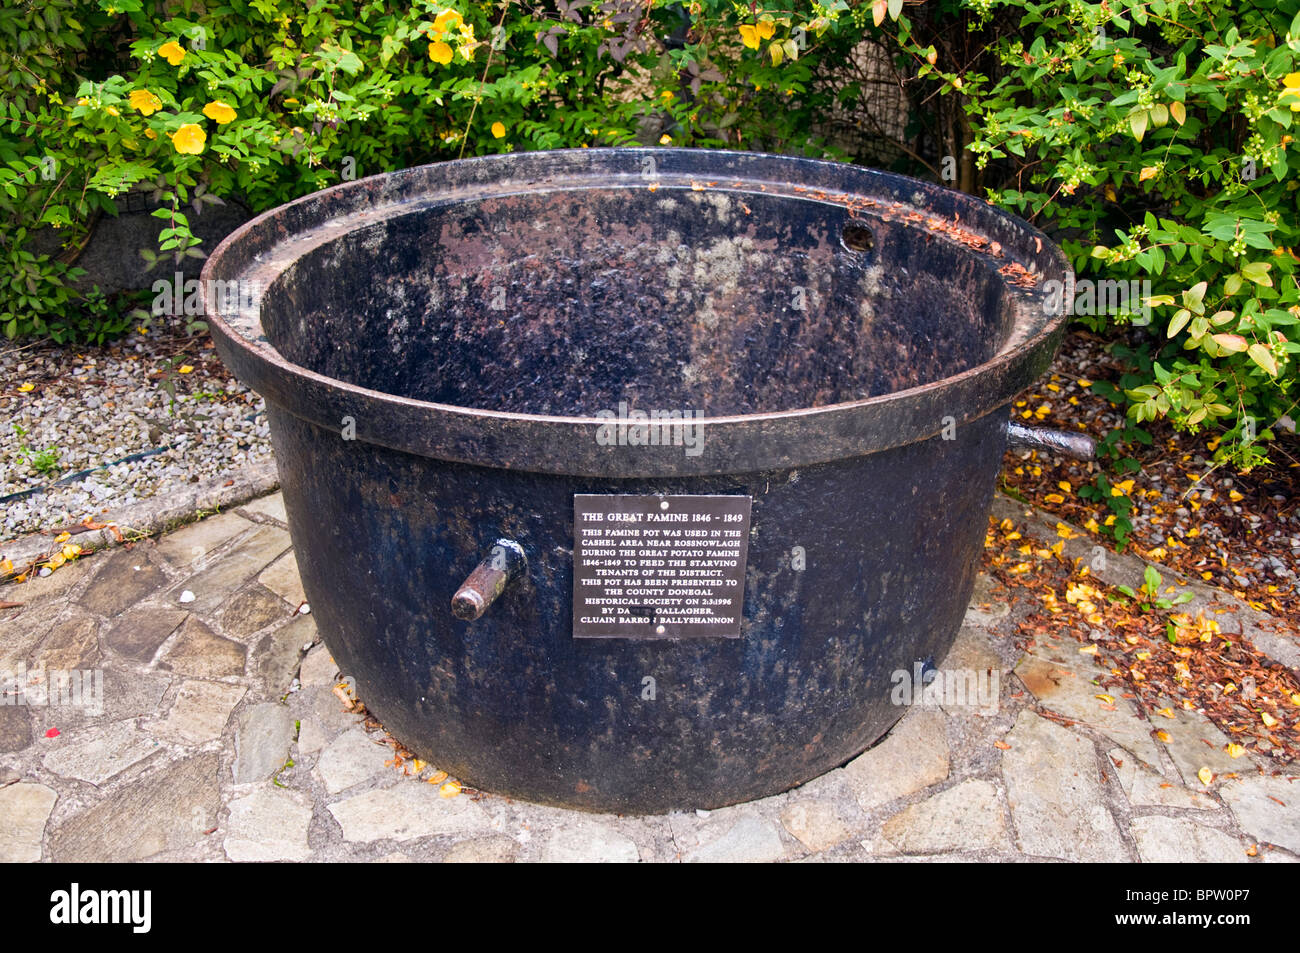 Famine pot used to cook soup for the starving during the Irish potato famine of 1846 - 1849 Stock Photo